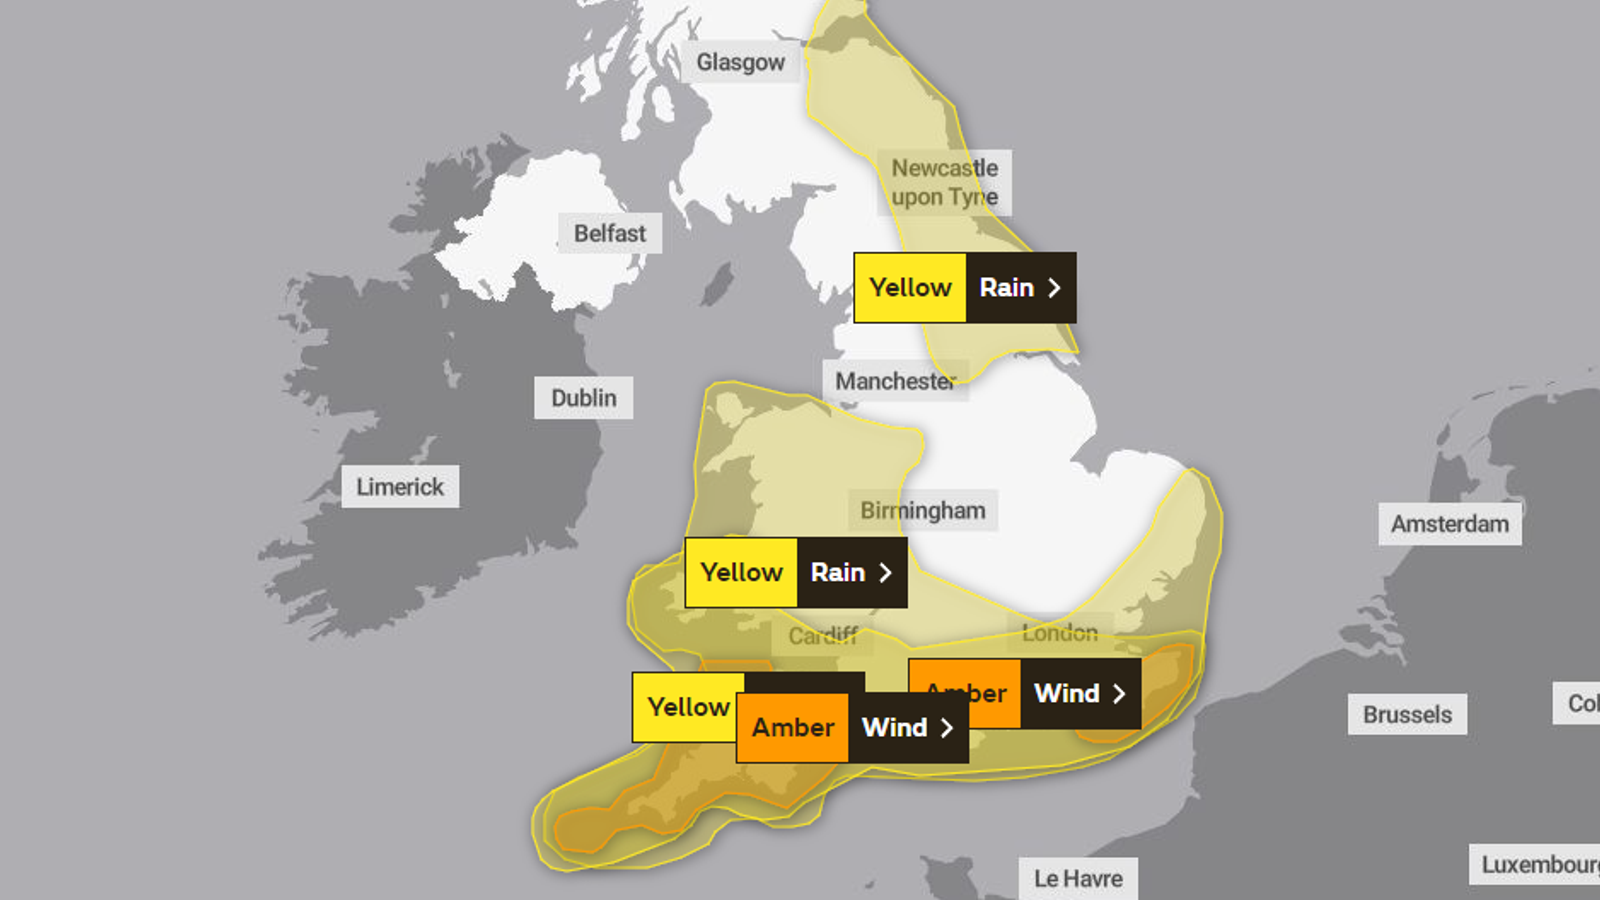 Where else will Storm Ciaran cause bad weather? A list of Met Office rain and wind warnings across UK